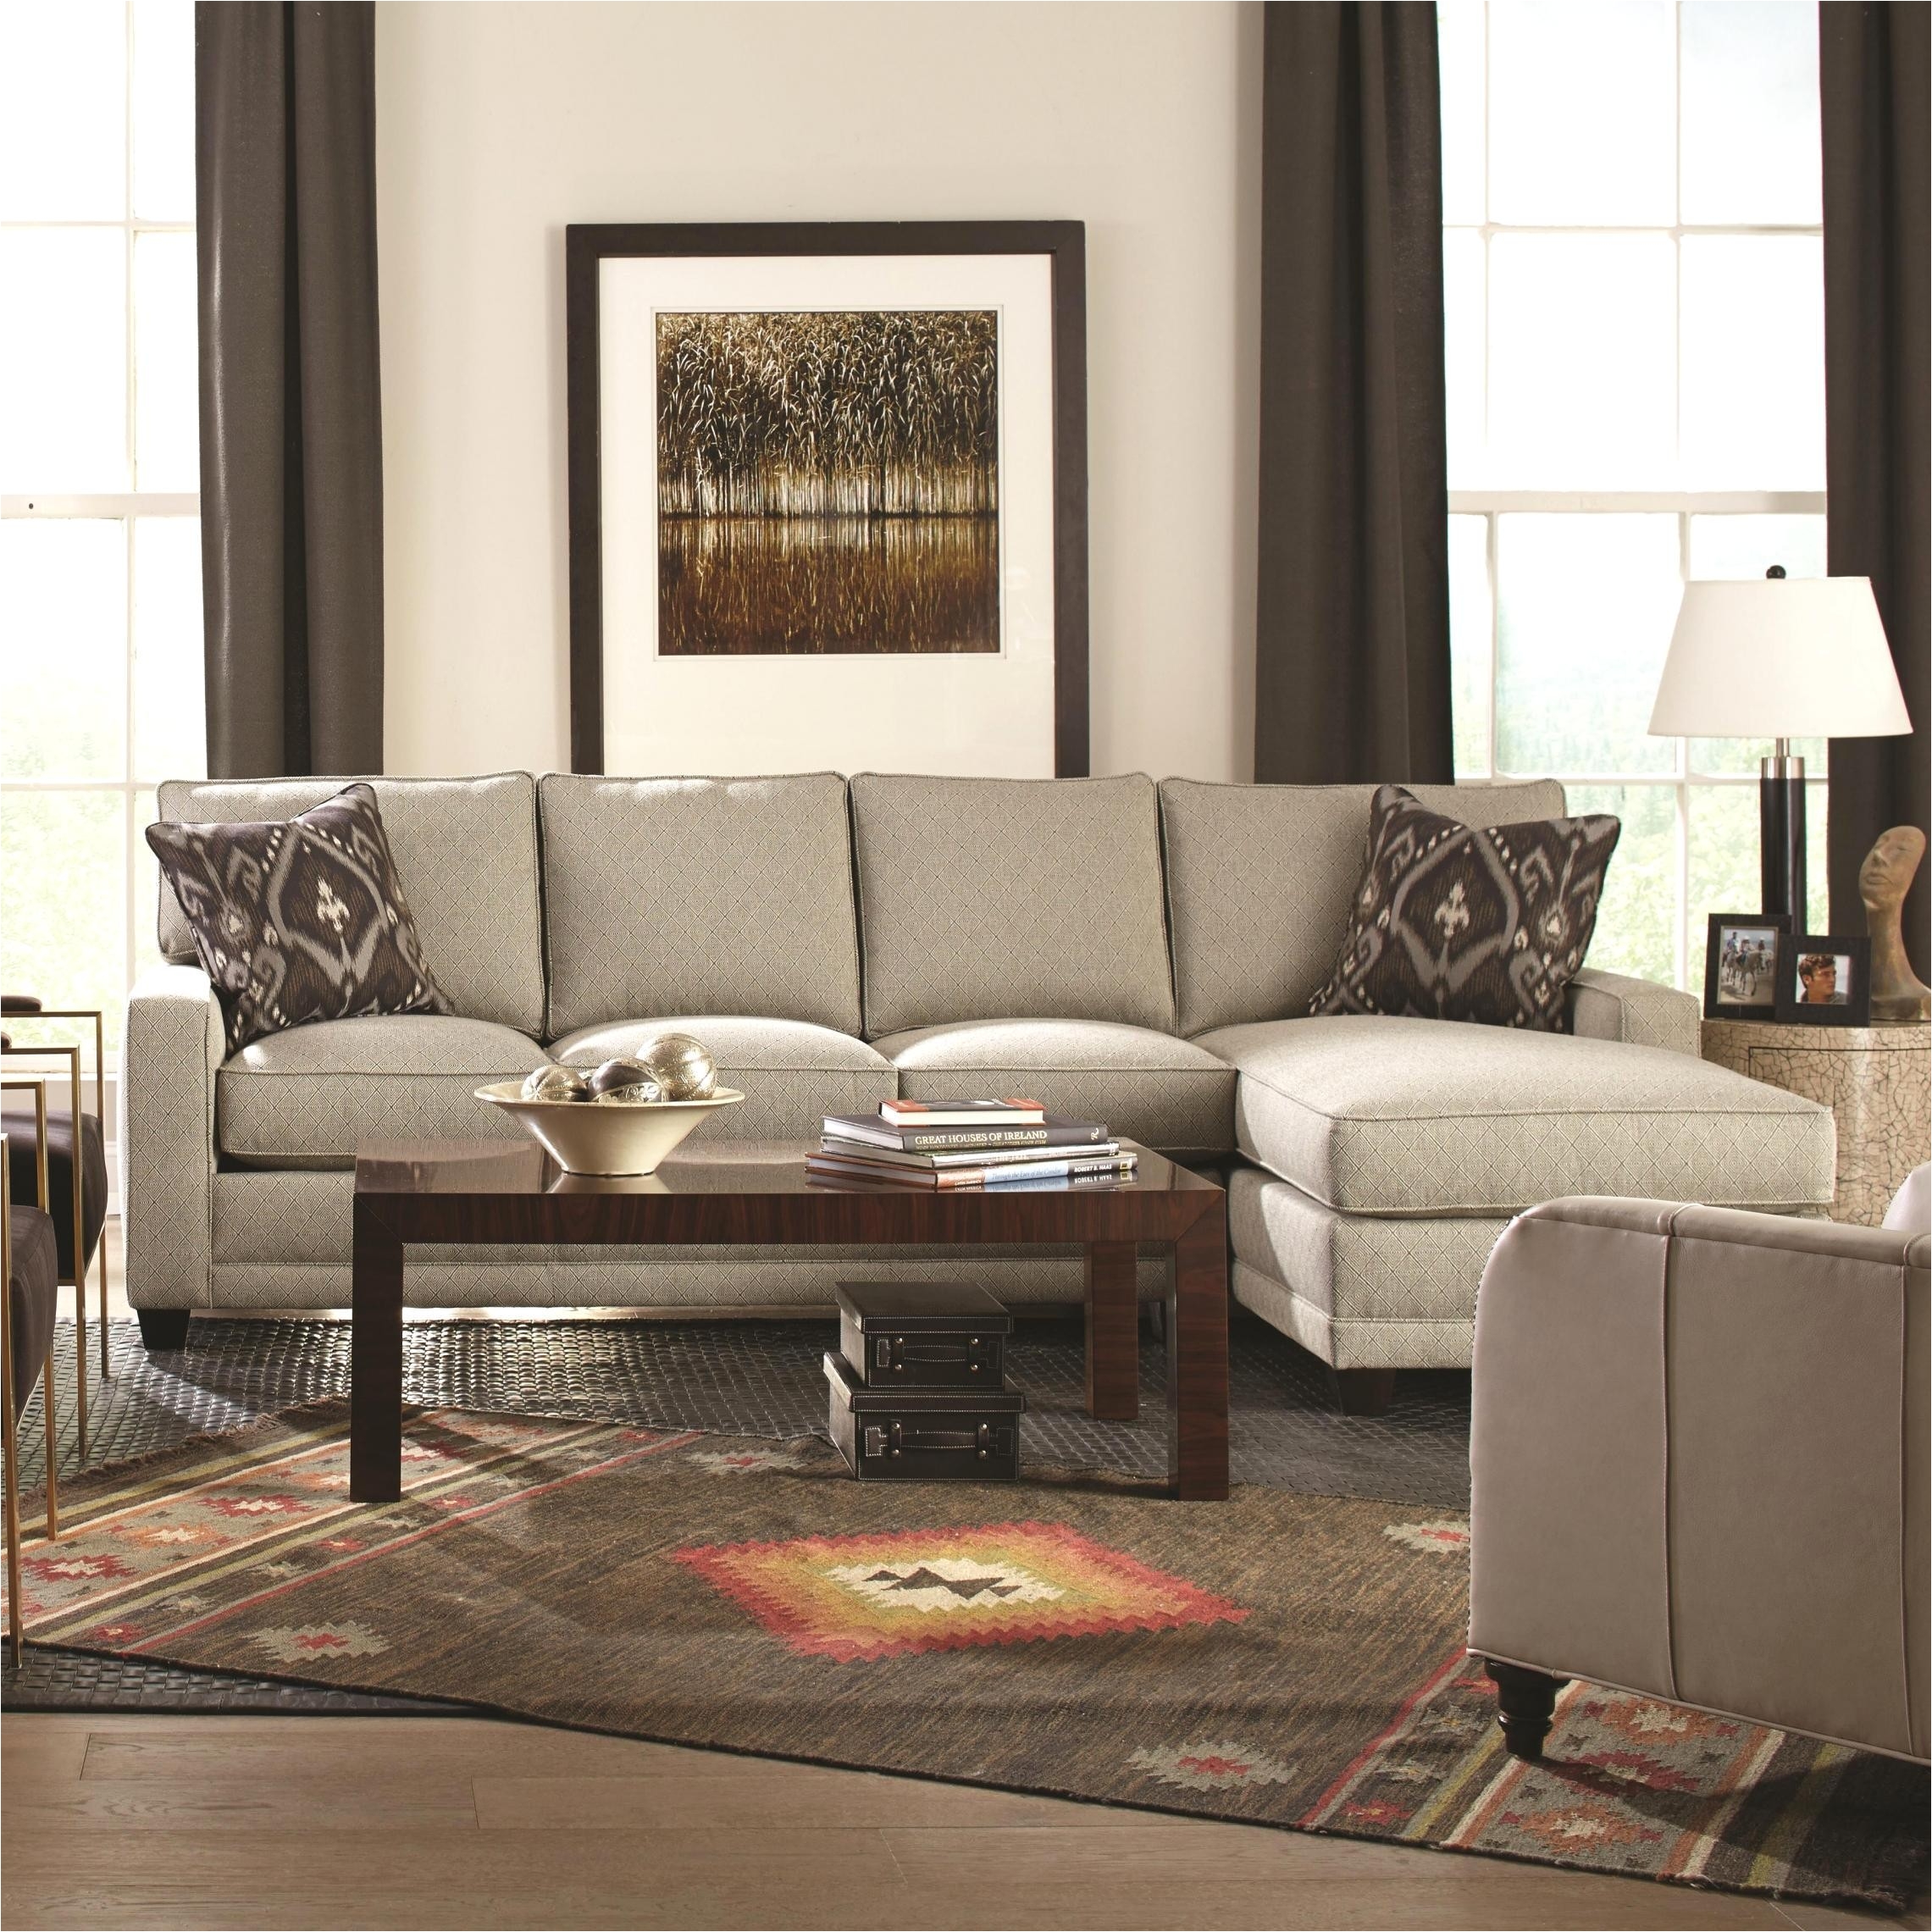 Decor Ideas for Small Living Rooms Wondrous Sectional sofa Small Living Room Unique Sectional Couch 0d